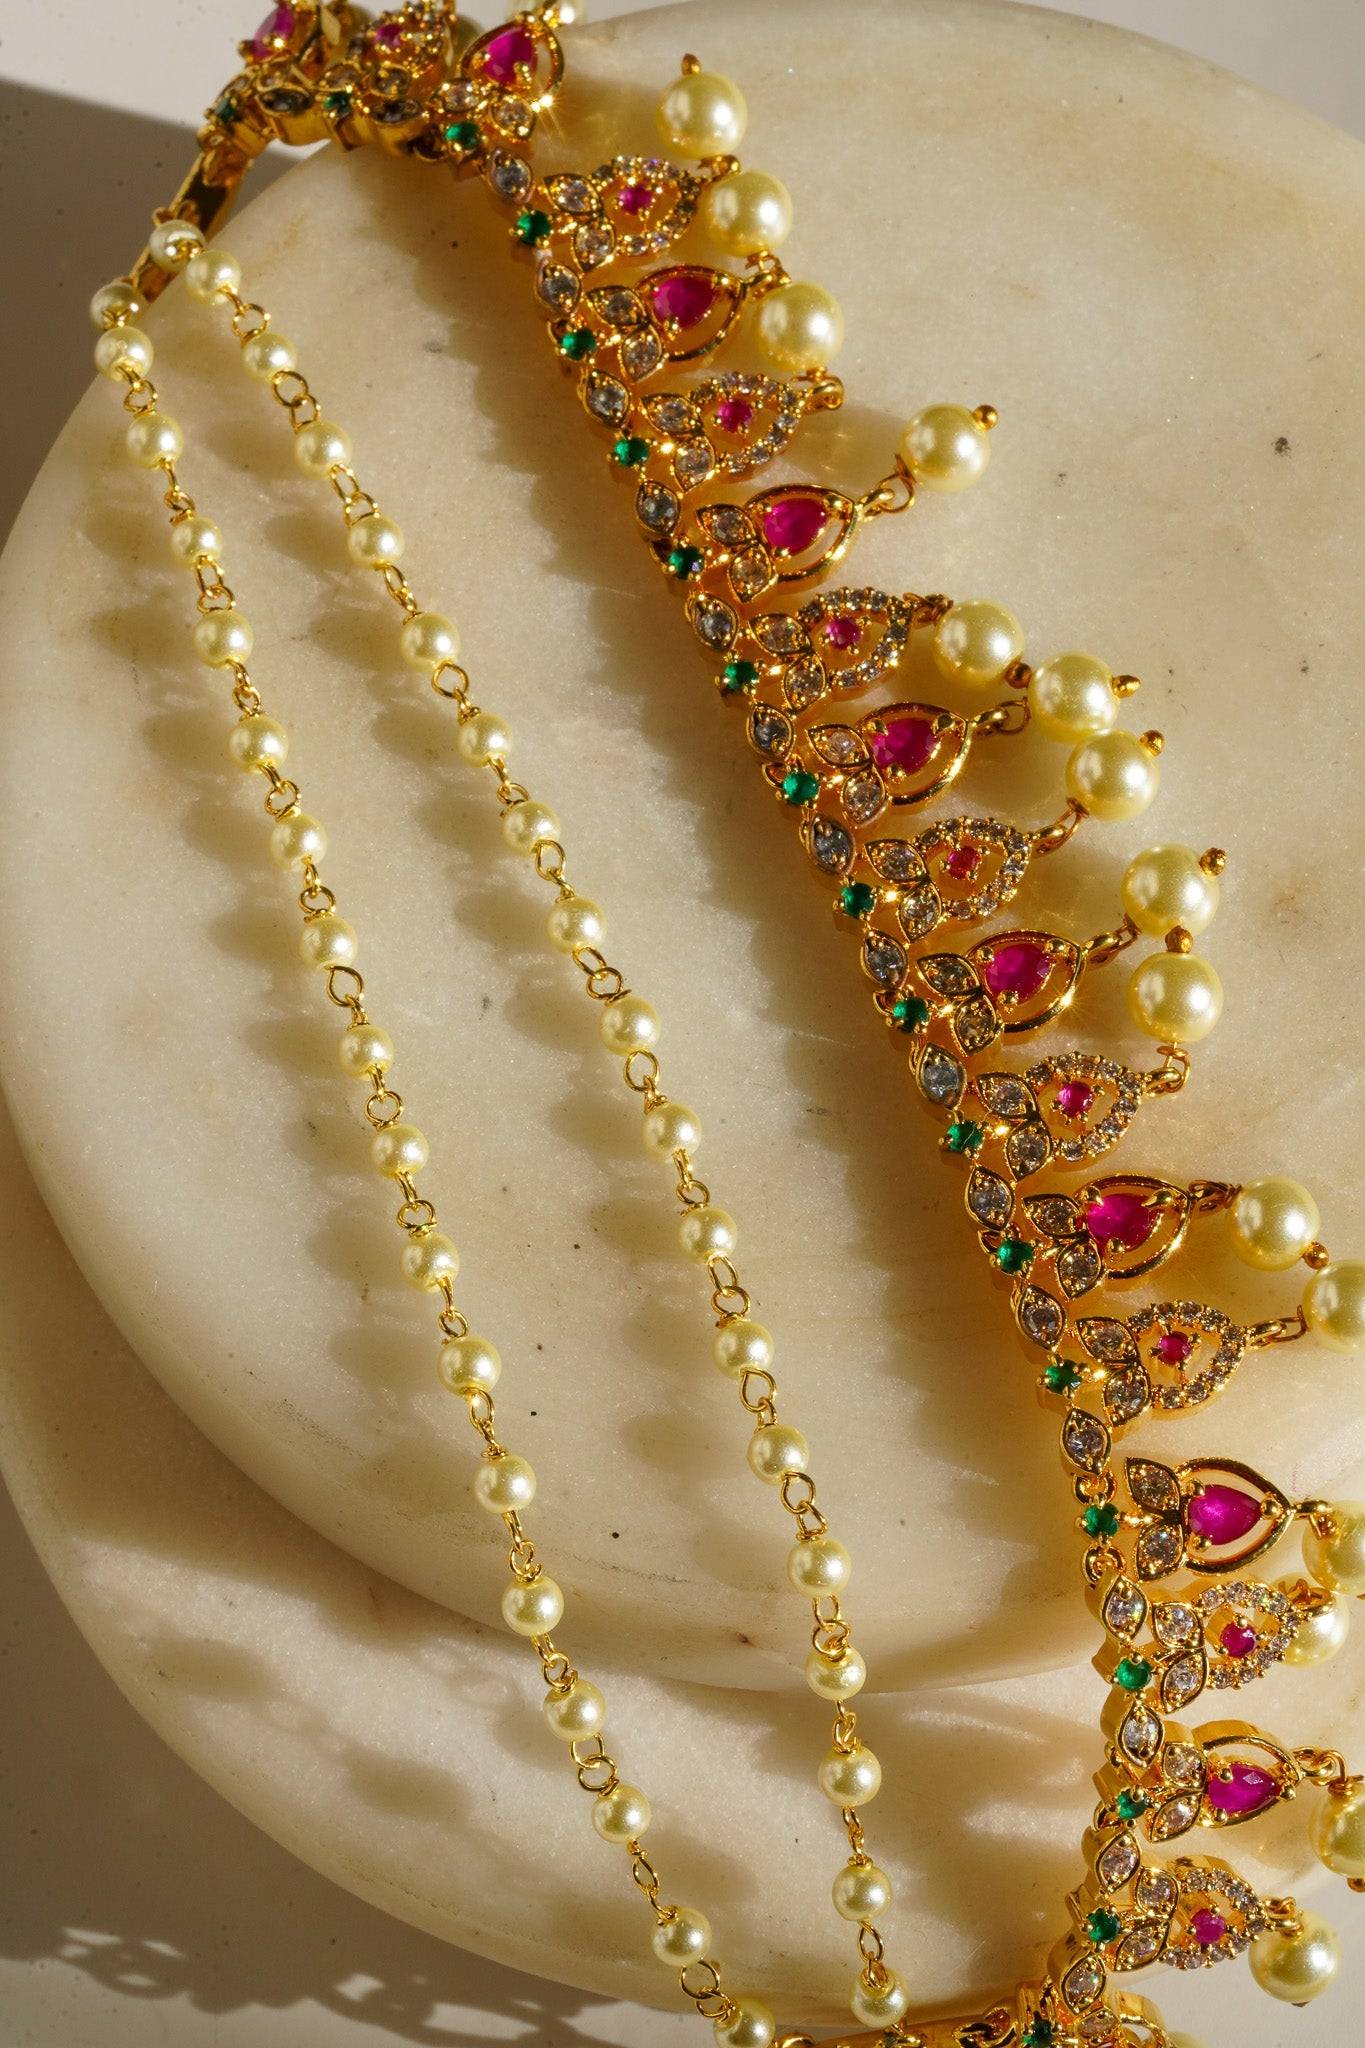 Mihika Diamanté Accent AD Ear Chains - Gold-plated with white or multicolor AD stones and pearls, featuring a convenient hook for easy placement.